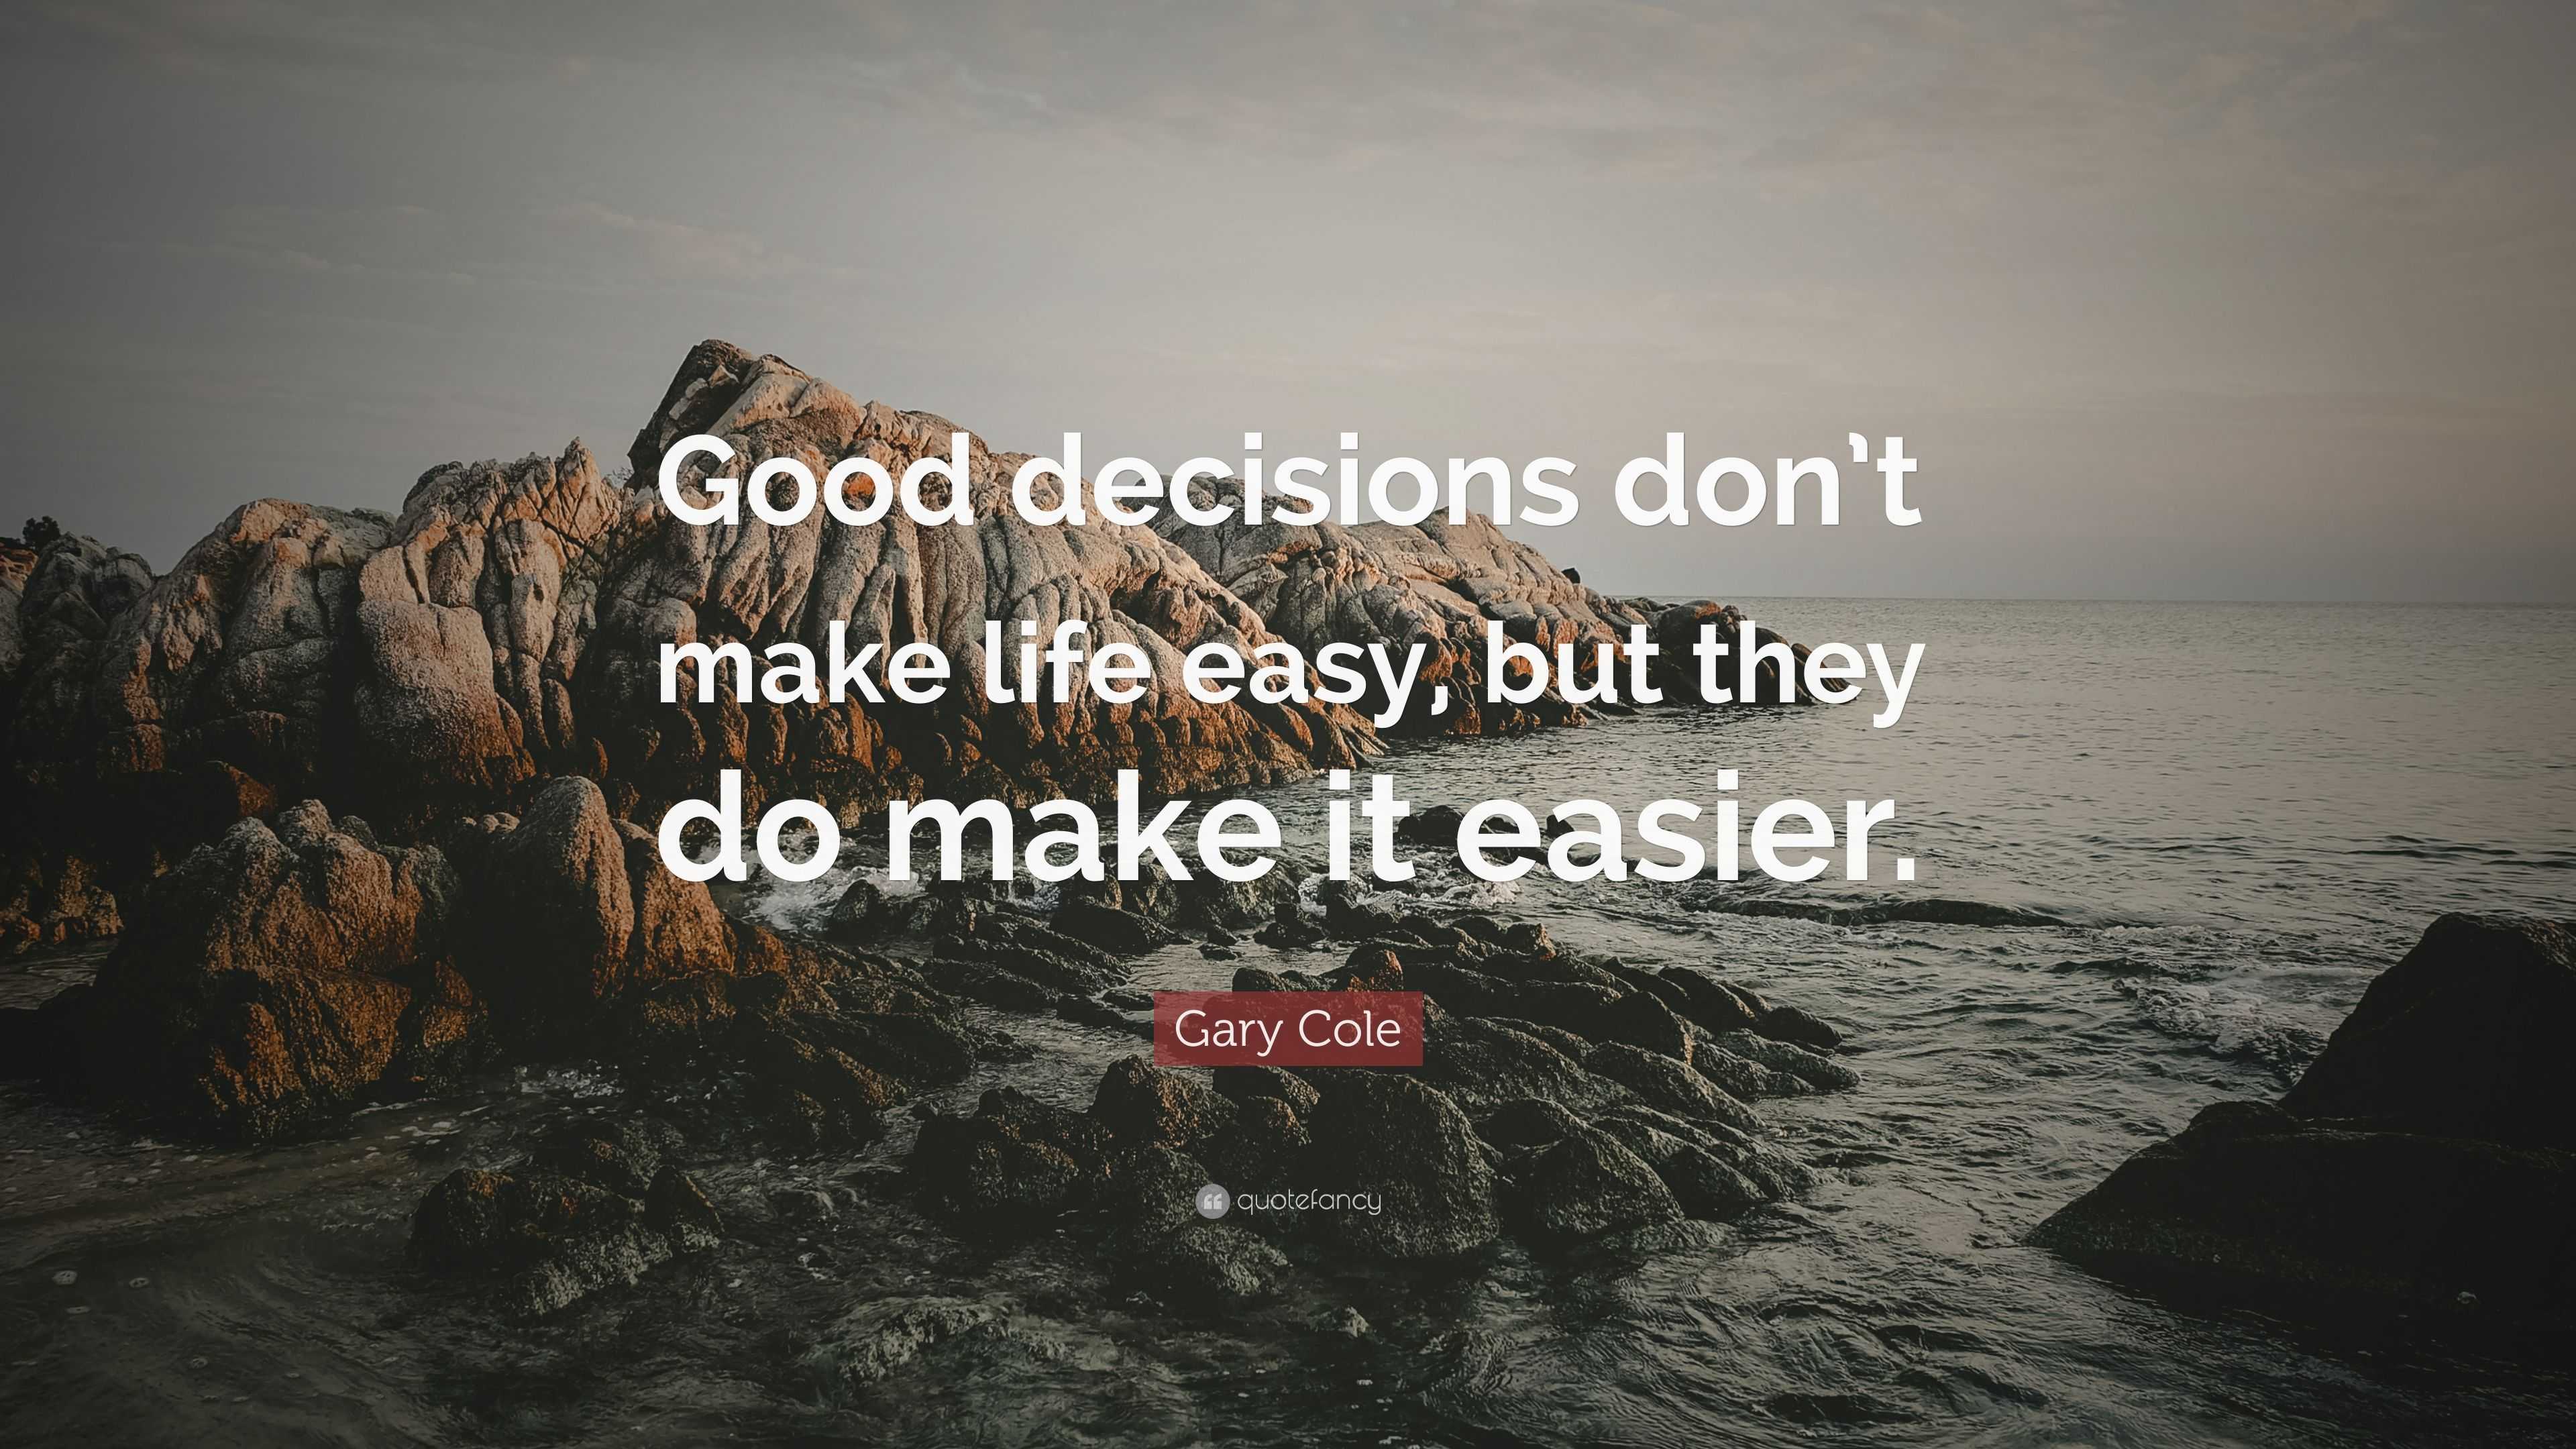 https://quotefancy.com/media/wallpaper/3840x2160/5930696-Gary-Cole-Quote-Good-decisions-don-t-make-life-easy-but-they-do.jpg